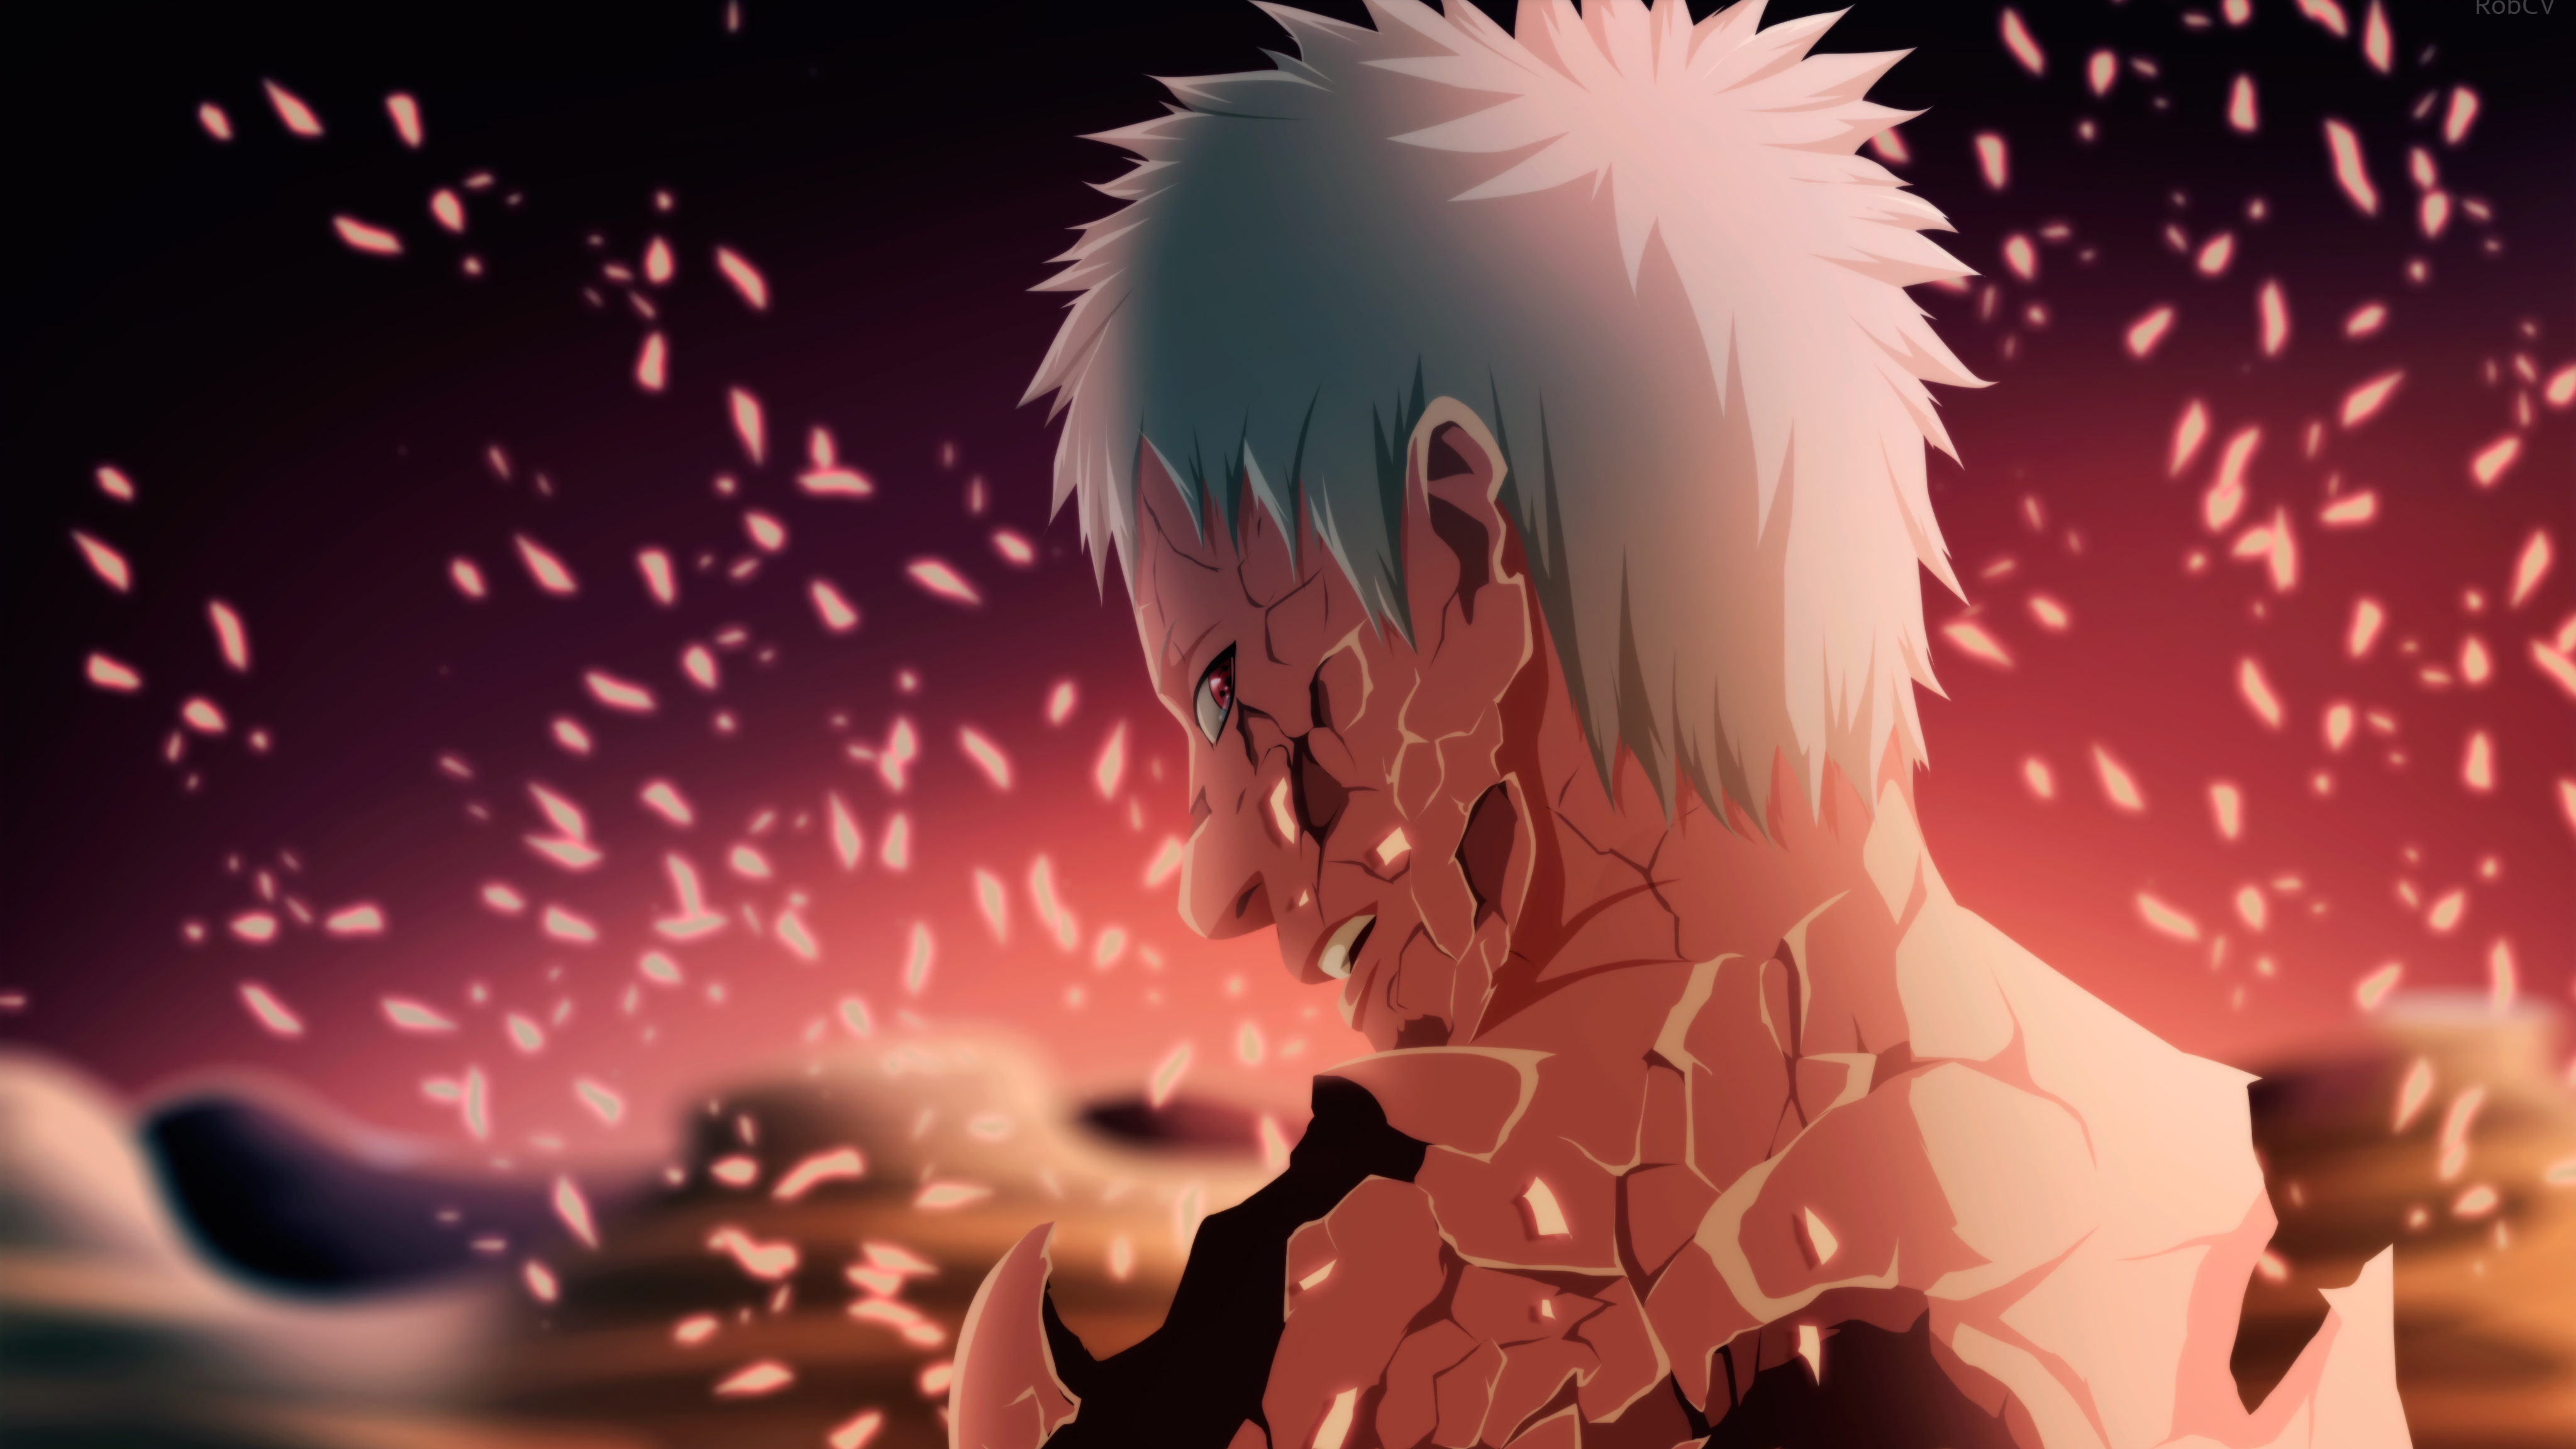 410+ Obito Uchiha Hd Wallpapers And Backgrounds